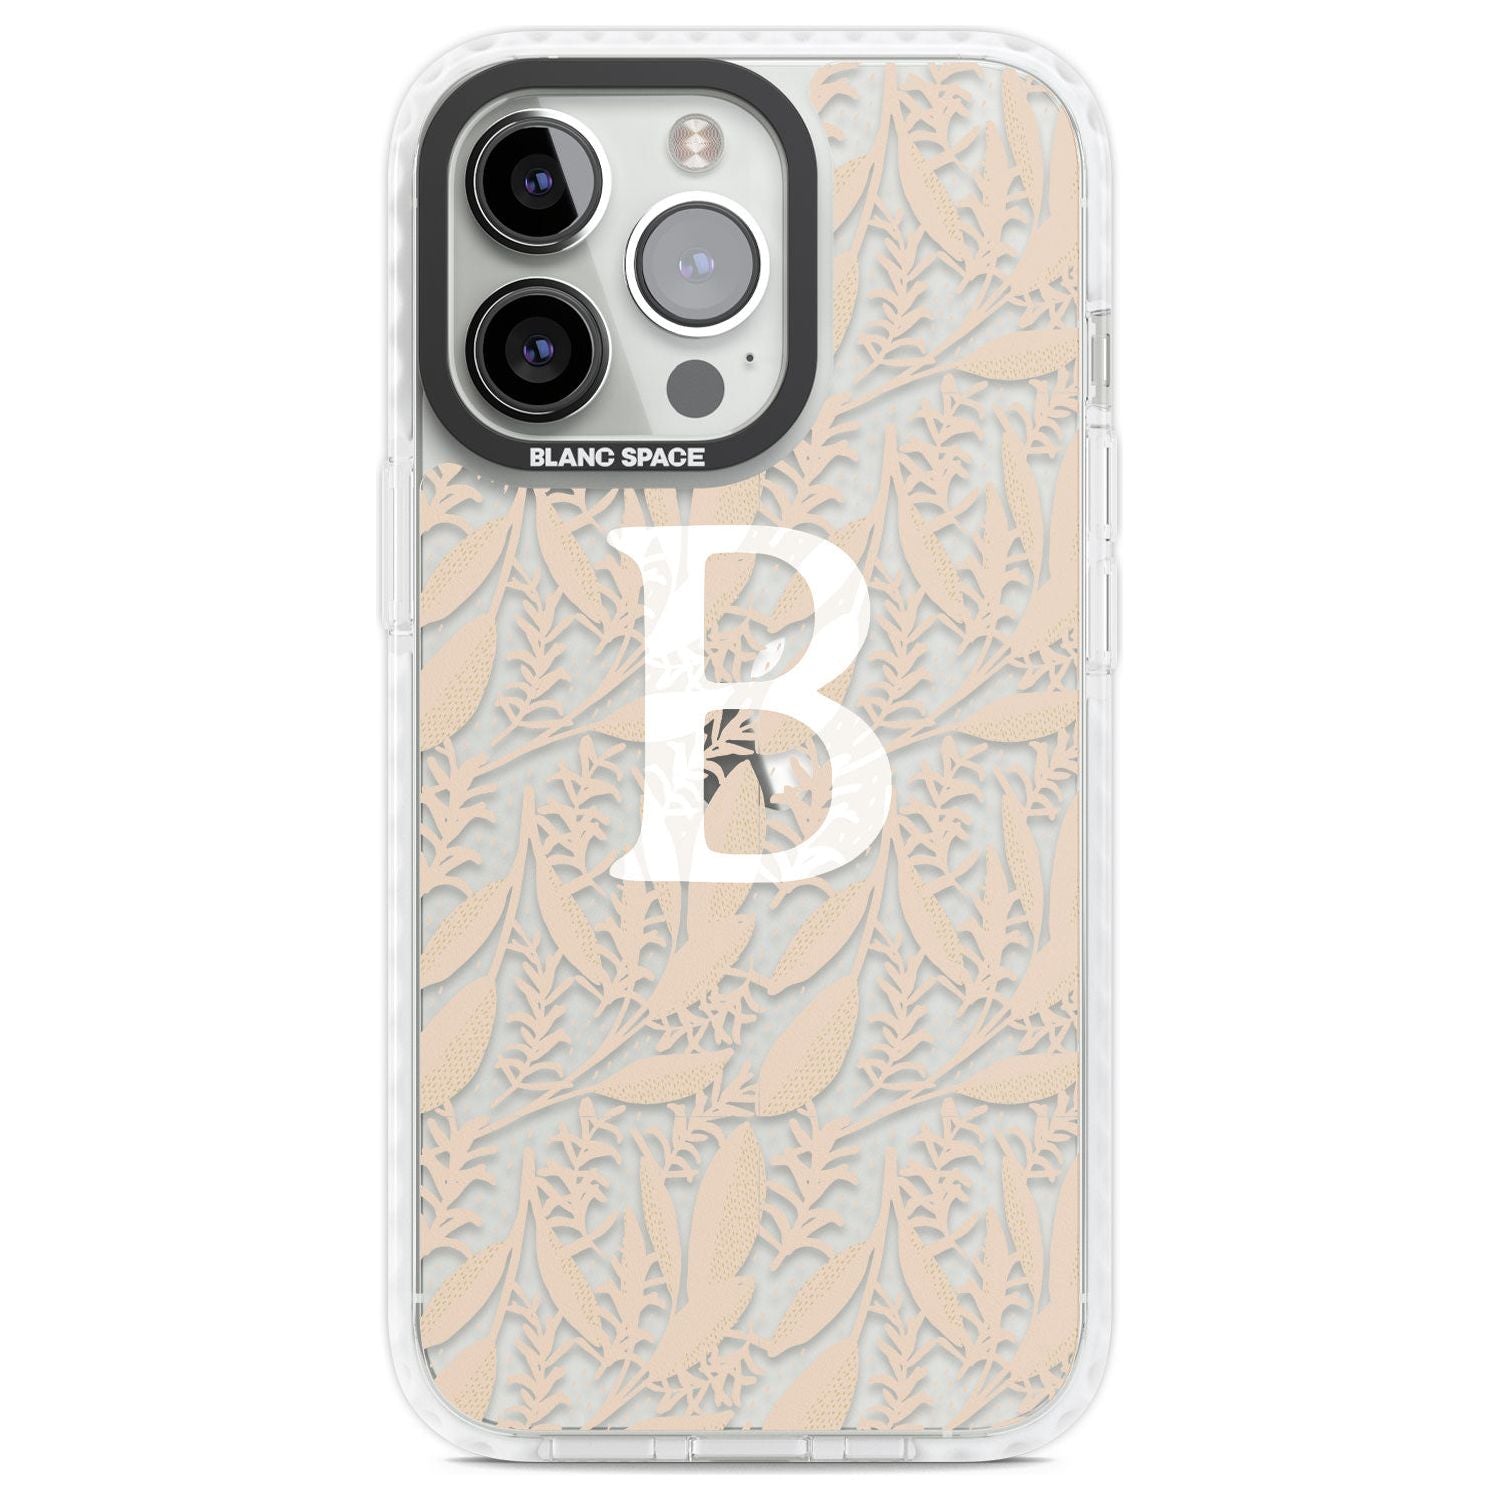 Personalised Subtle Monogram Abstract Floral Custom Phone Case iPhone 13 Pro / Impact Case,iPhone 14 Pro / Impact Case,iPhone 15 Pro Max / Impact Case,iPhone 15 Pro / Impact Case Blanc Space